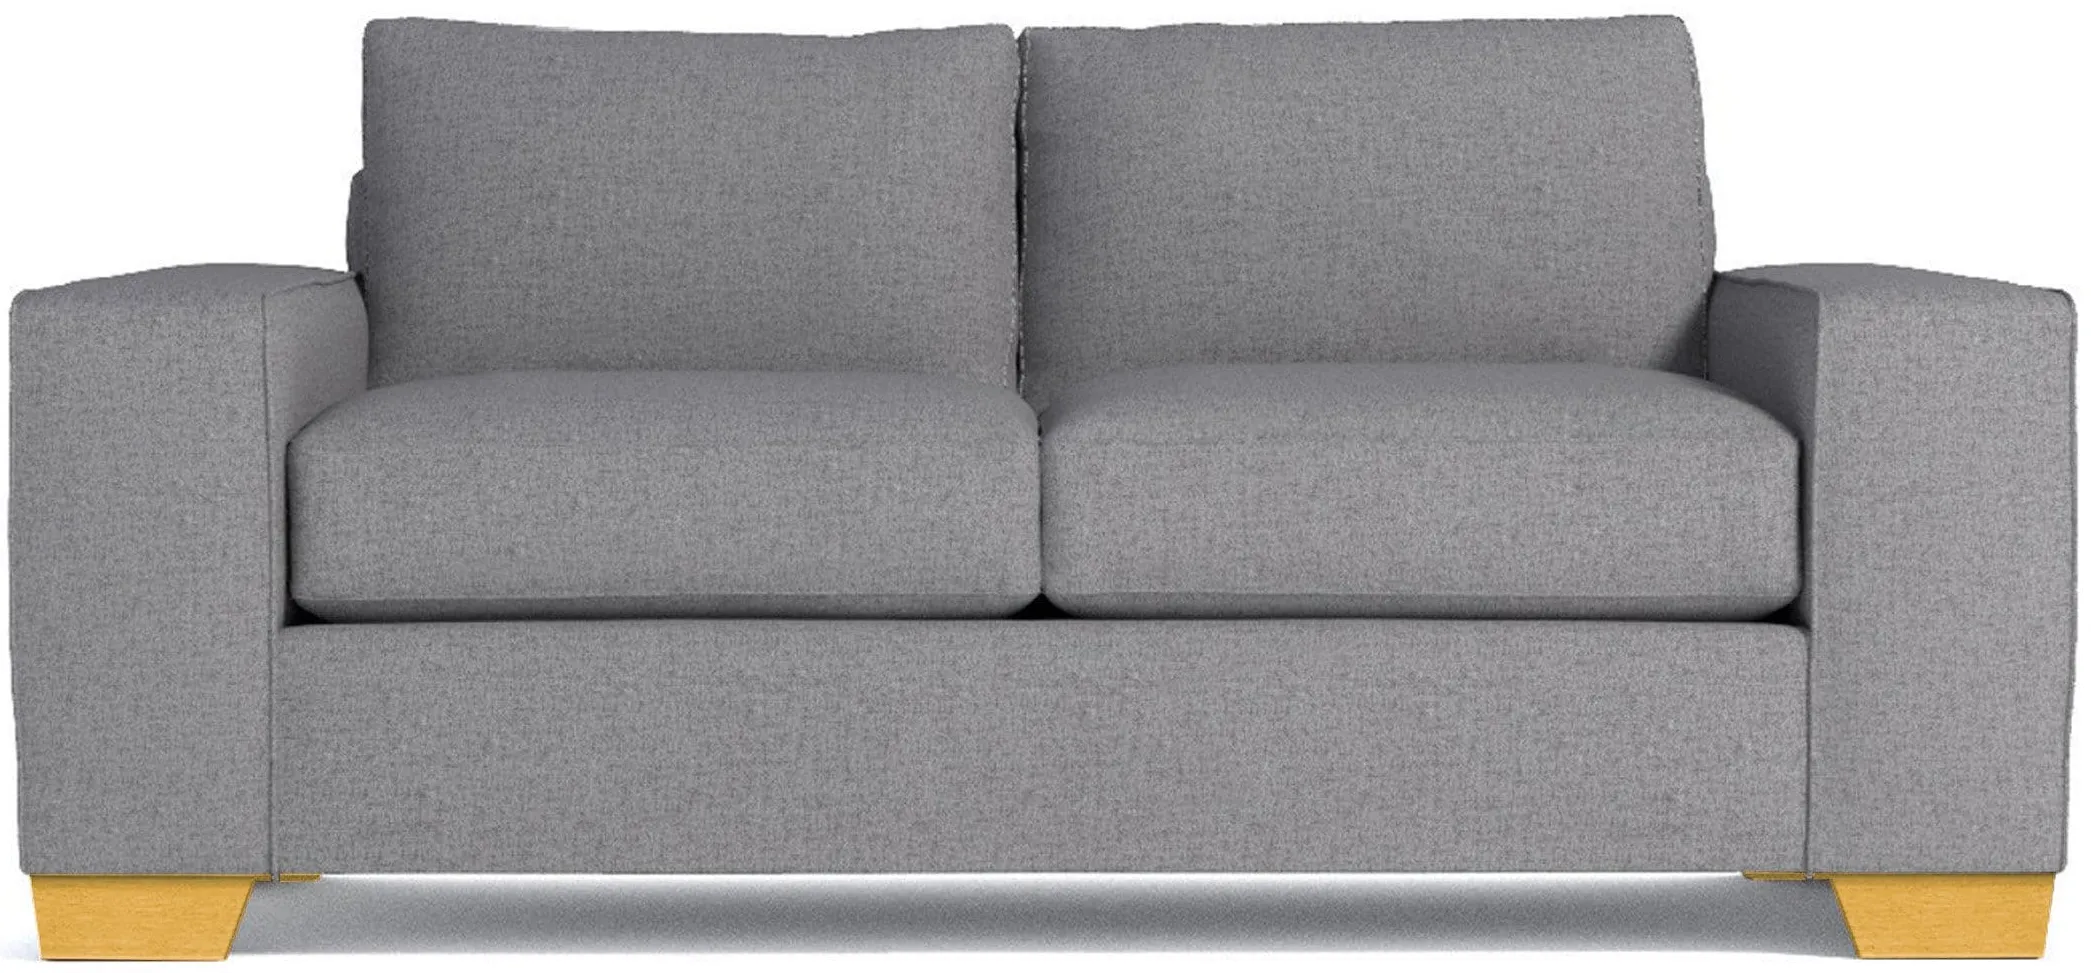 Melrose Twin Size Sleeper Sofa Bed